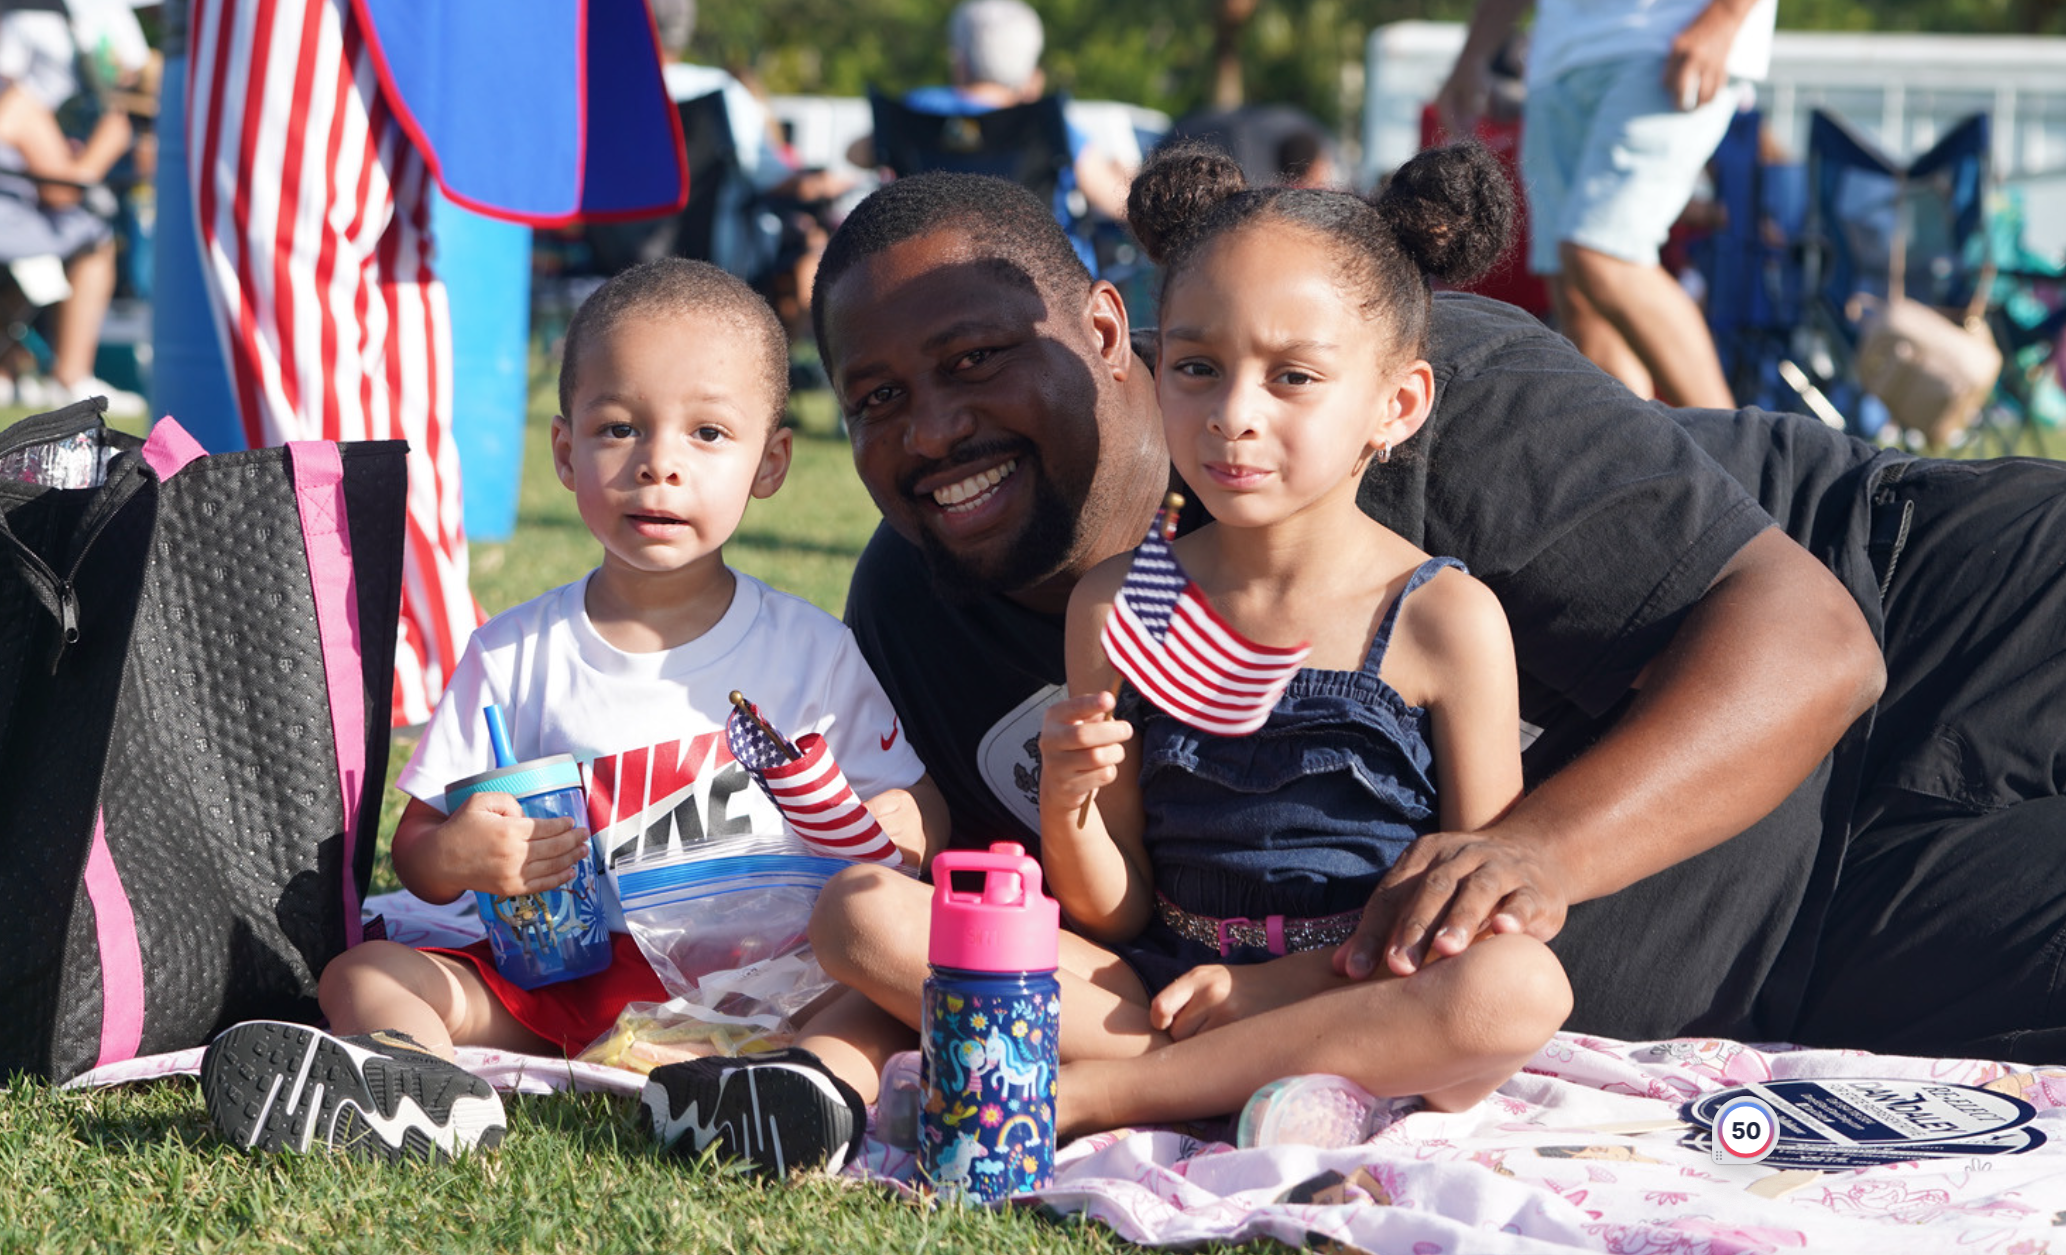 Tamarac's 4th of July Celebration Features Music, Food, Fireworks, and Fun